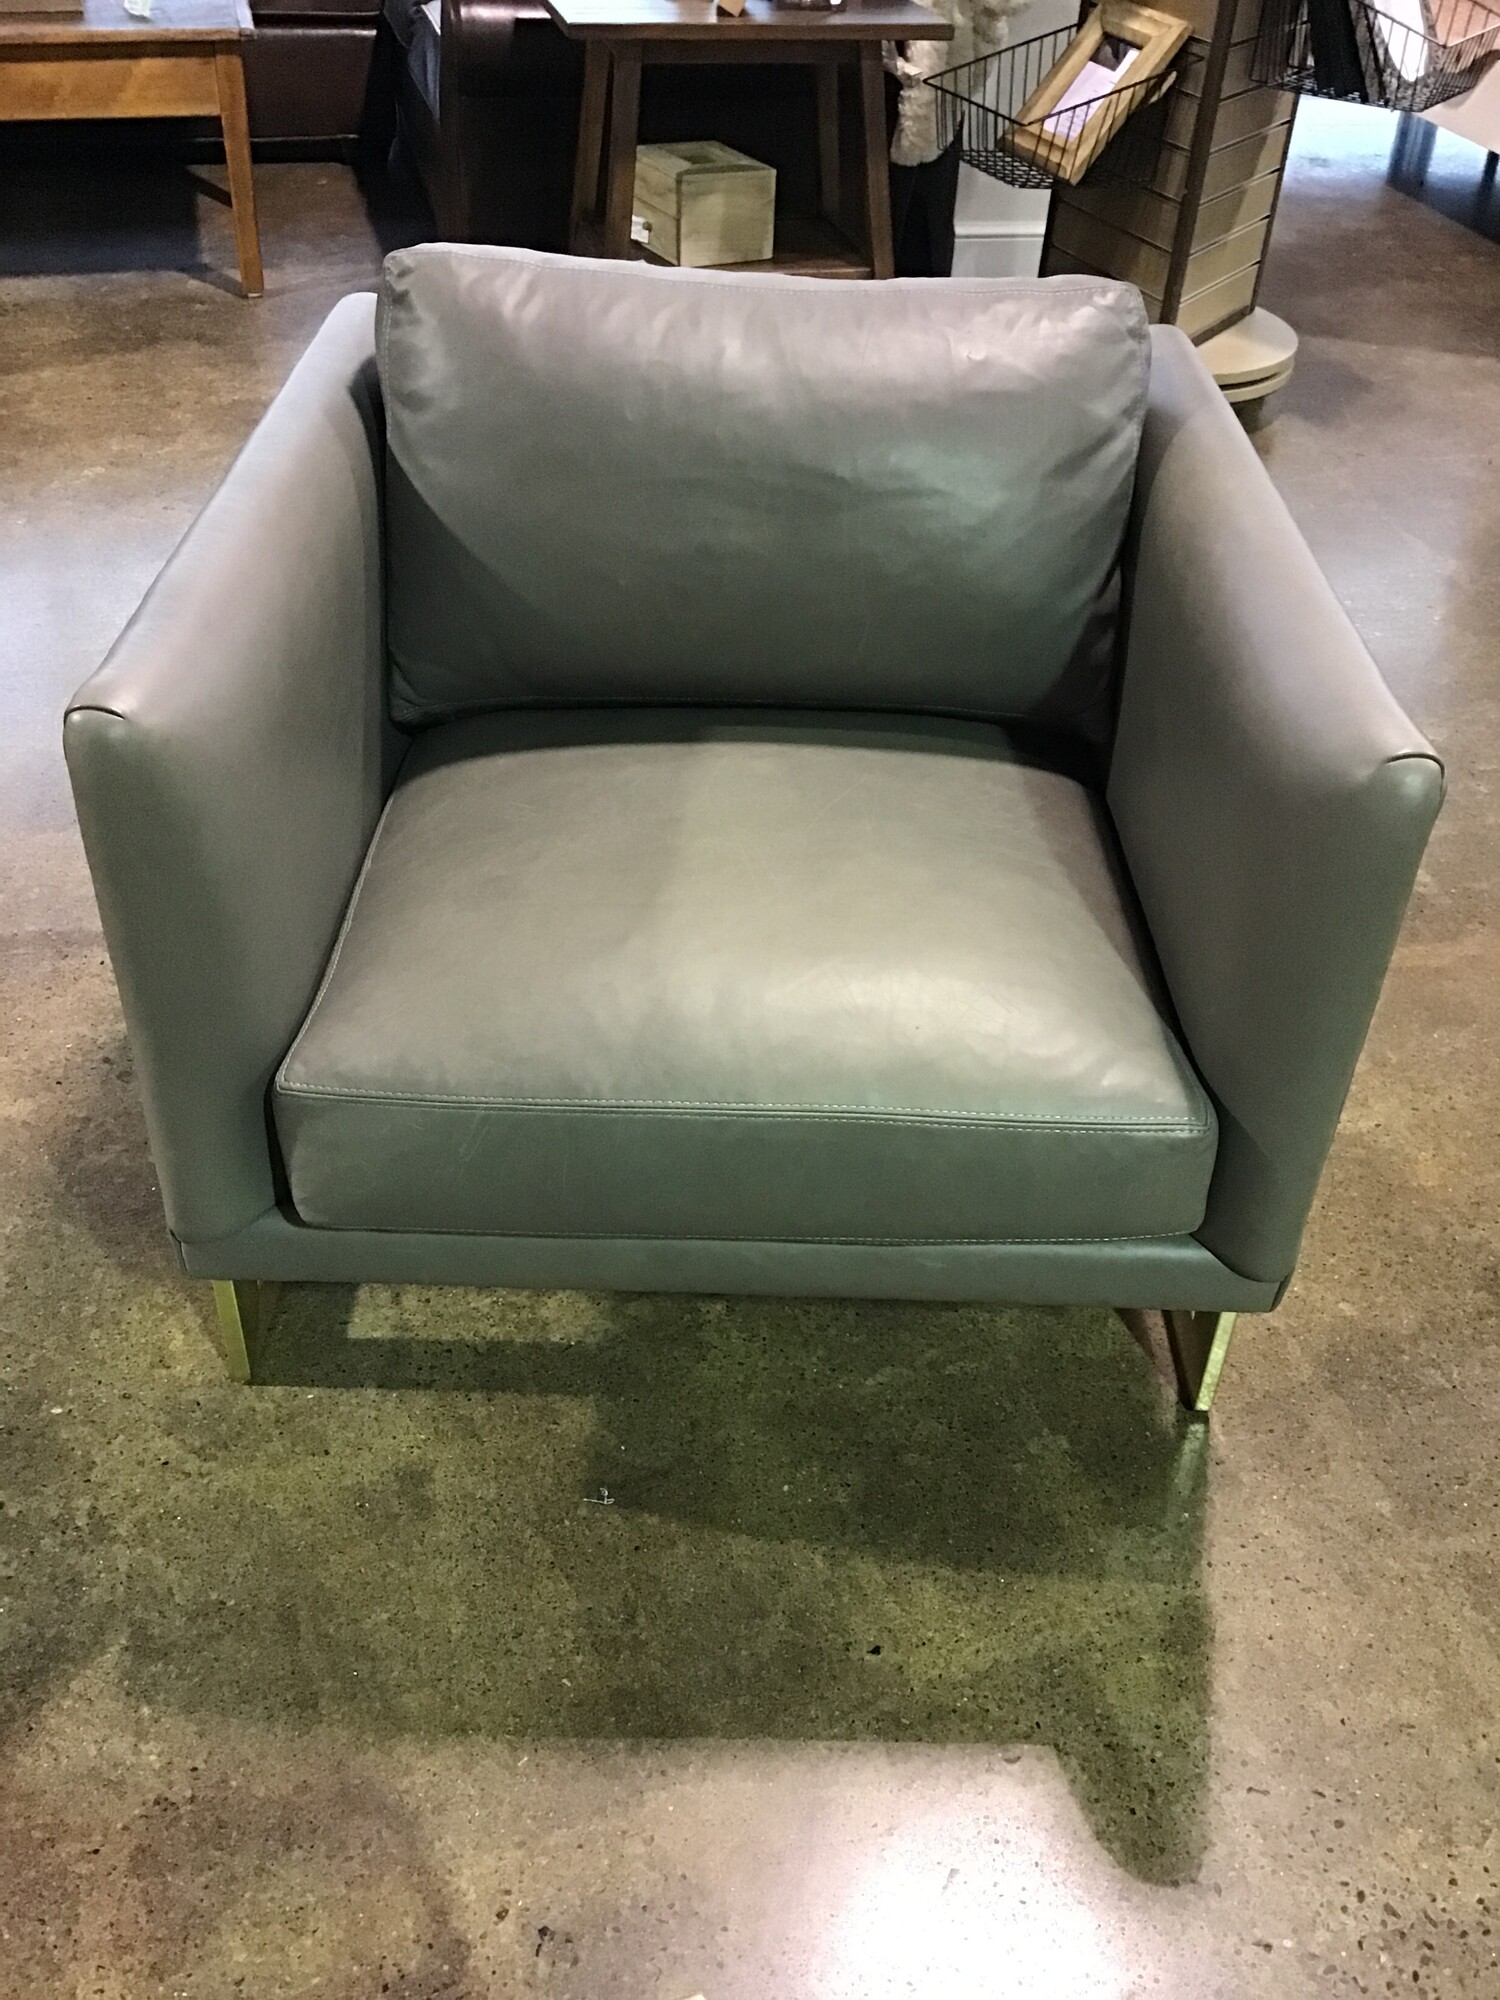 This super chic gray leather chair from RH is still featured on their website today! The chair is from the Milo Baughman collection and is model #3426 (current retail for RH Members is $5400!). Crafted by American designer Milo Baughman in 1968, this visually arresting chair features an upholstered cube that seems to float inside an angular flat-bar frame. Thick, loose cushions offer ultra-comfortable seating. Made by hand today as it was more than four decades ago by Thayer Coggin, master furniture crafters in North Carolina.
Dimensions are 31 in x 31 in x 29 in